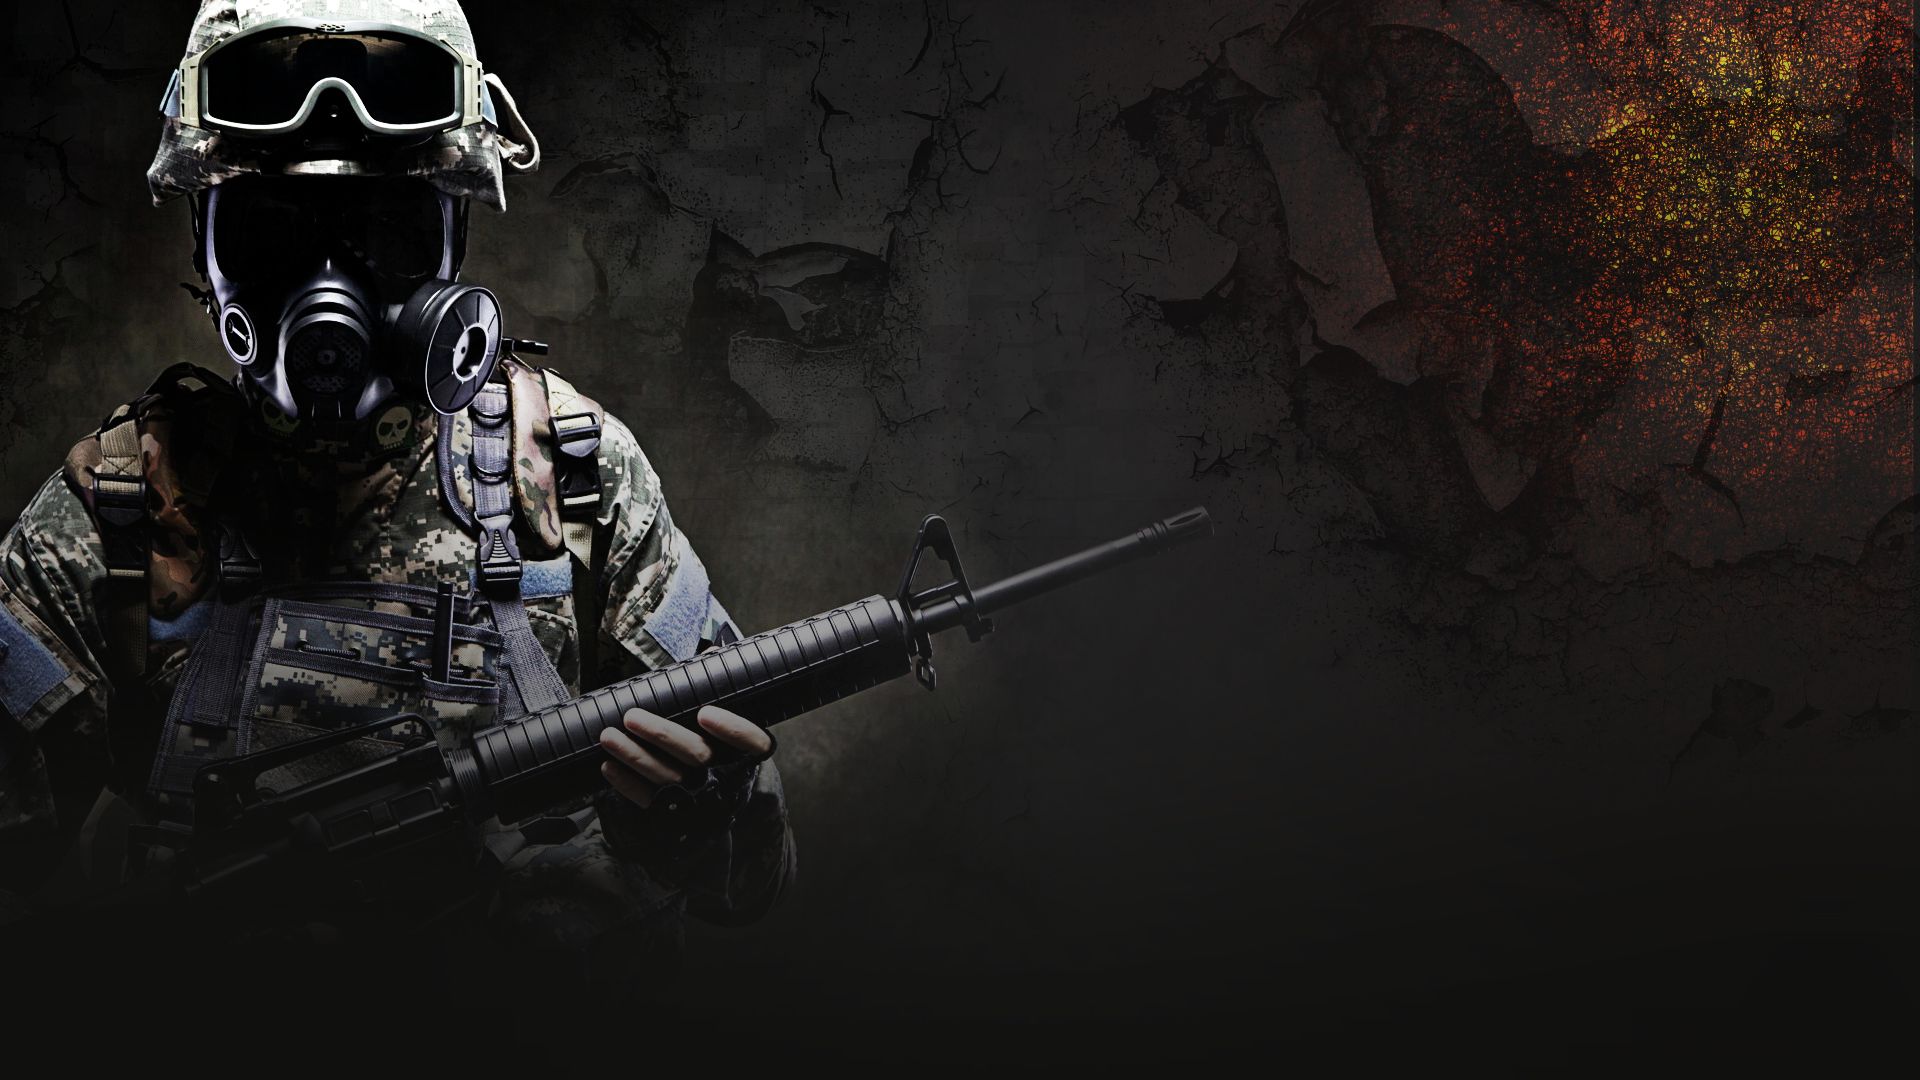 counter strike wallpaper,personal protective equipment,shooter game,soldier,games,darkness